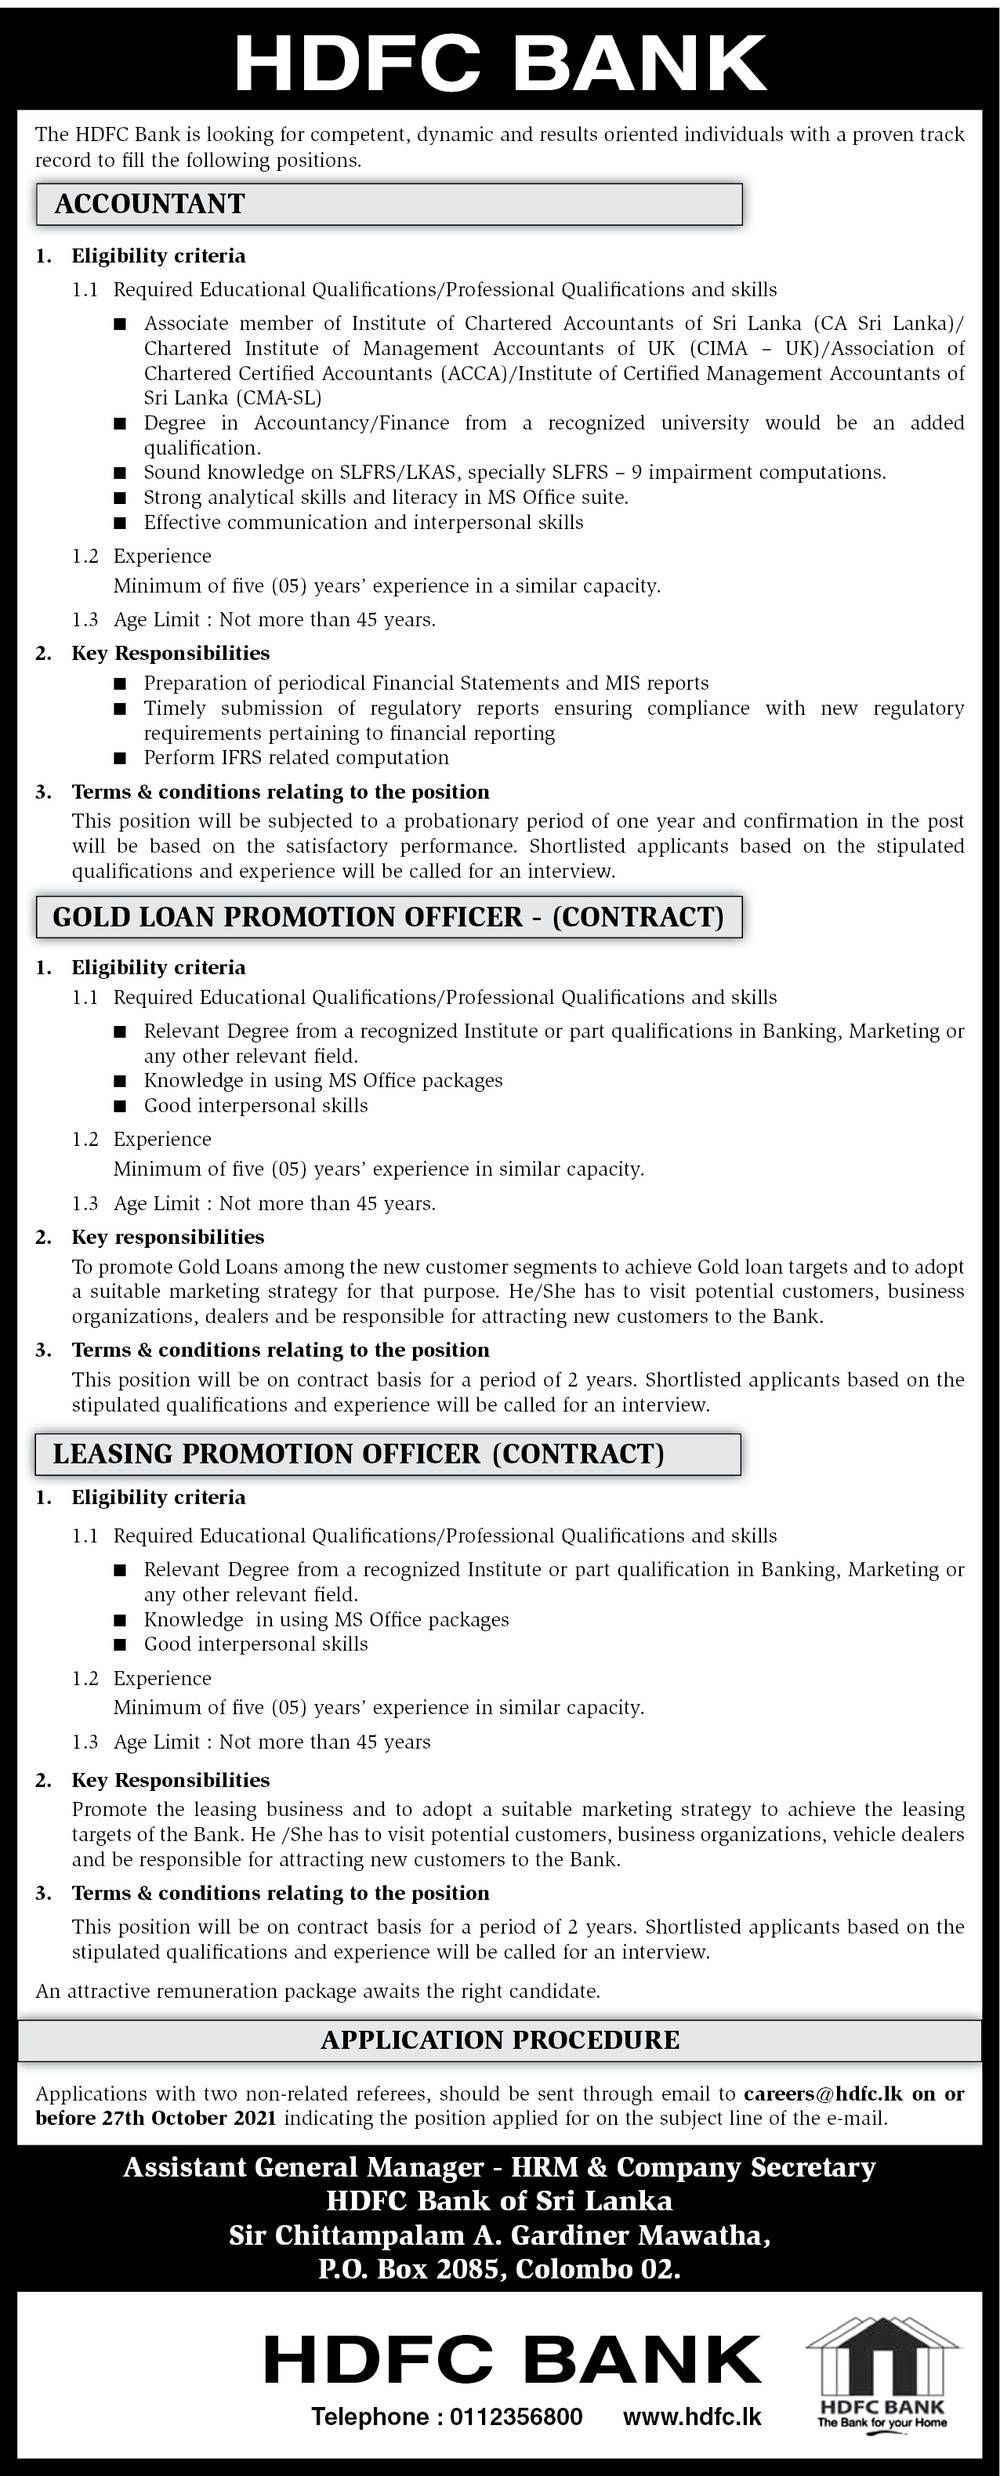 Accountant, Gold Loan Promotion Officer, Leasing Promotion Officer - HDFC Bank English